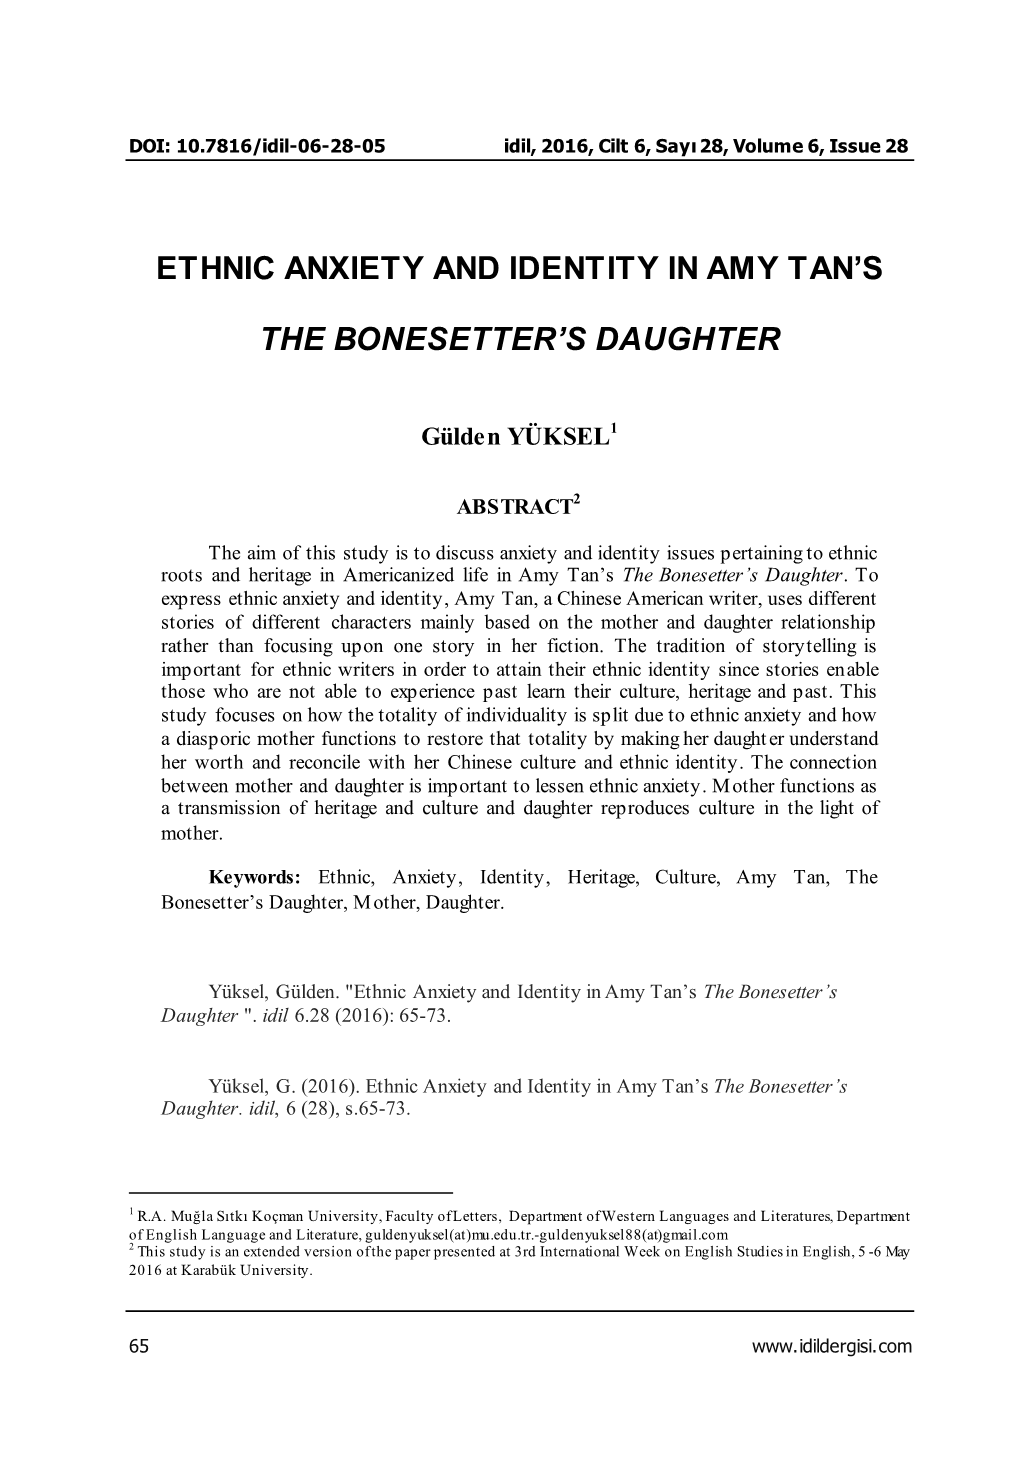 Ethnic Anxiety and Identity in Amy Tan's the Bonesetter's